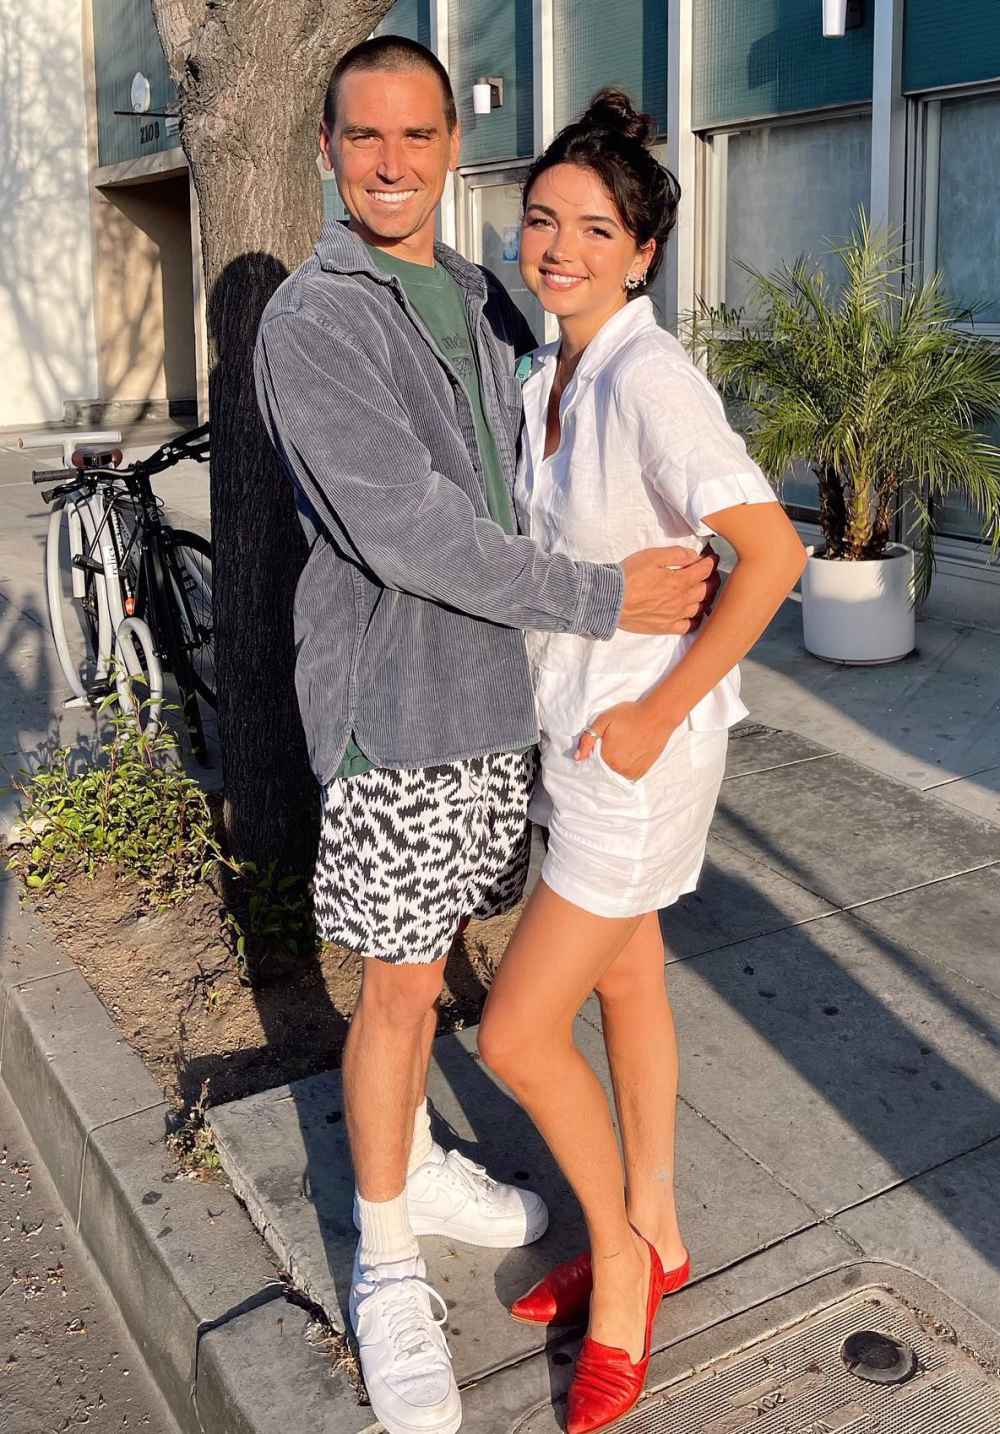 The Bachelor's Bekah Martinez Is Engaged to Boyfriend Grayston Leonard After Nearly 5 Years Together